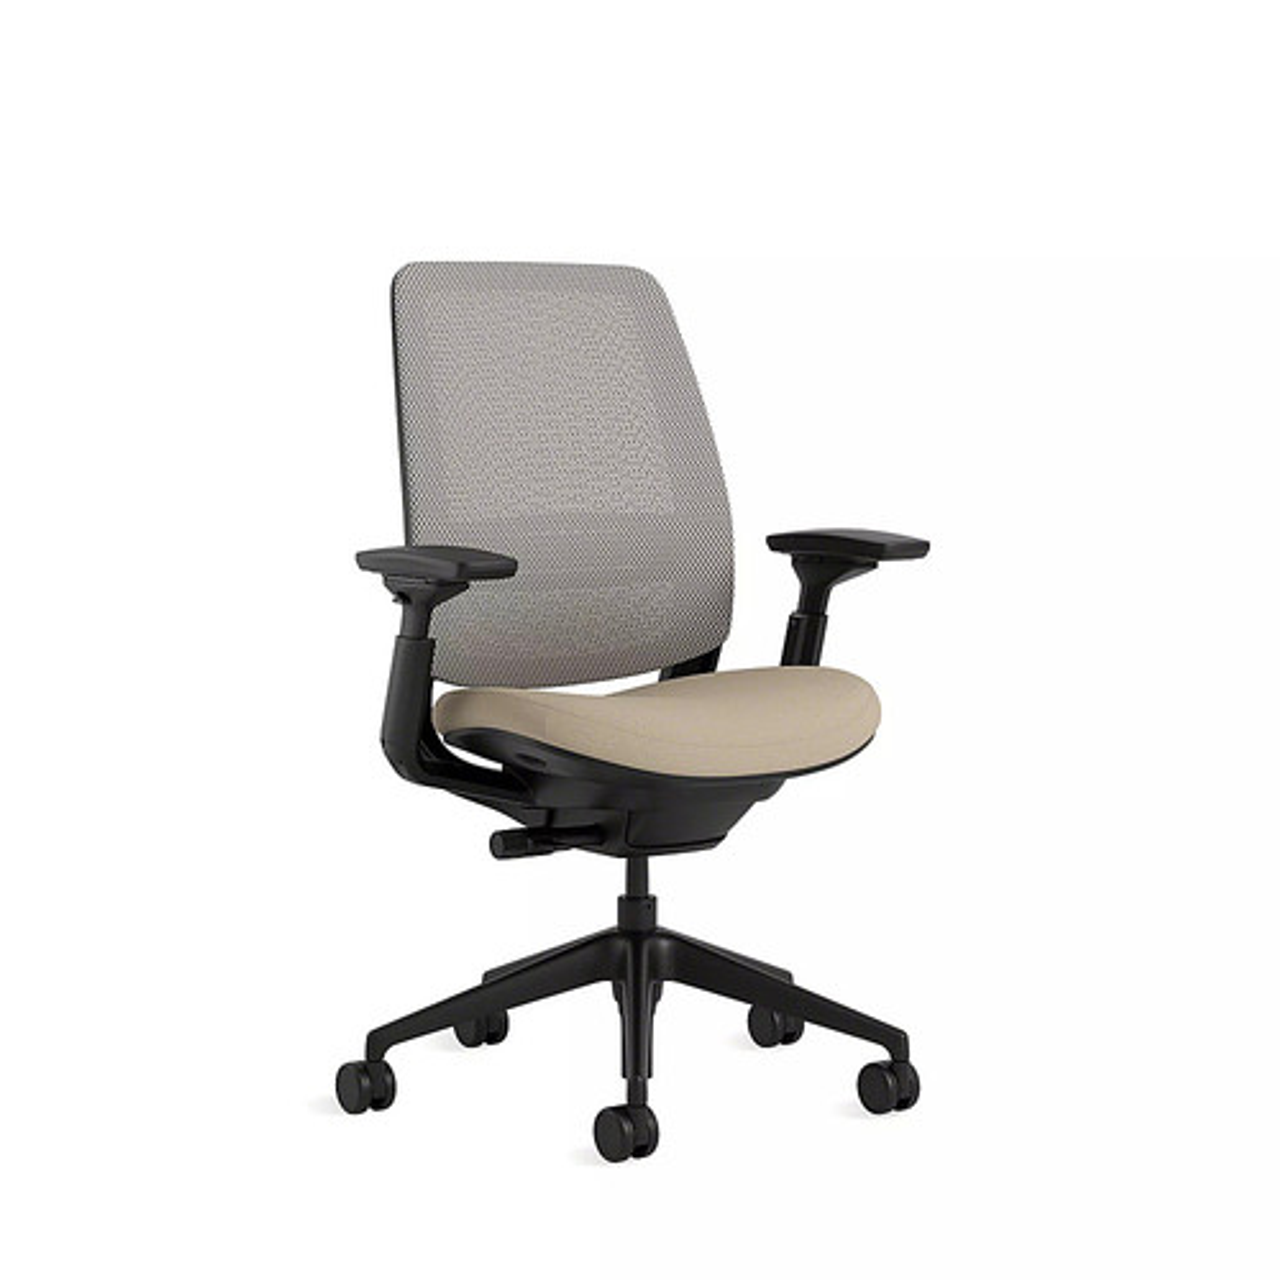 Steelcase Series 2 3D Airback Chair with Black Frame in Oatmeal Fabric and Nickel Mesh with Hard Floor Casters